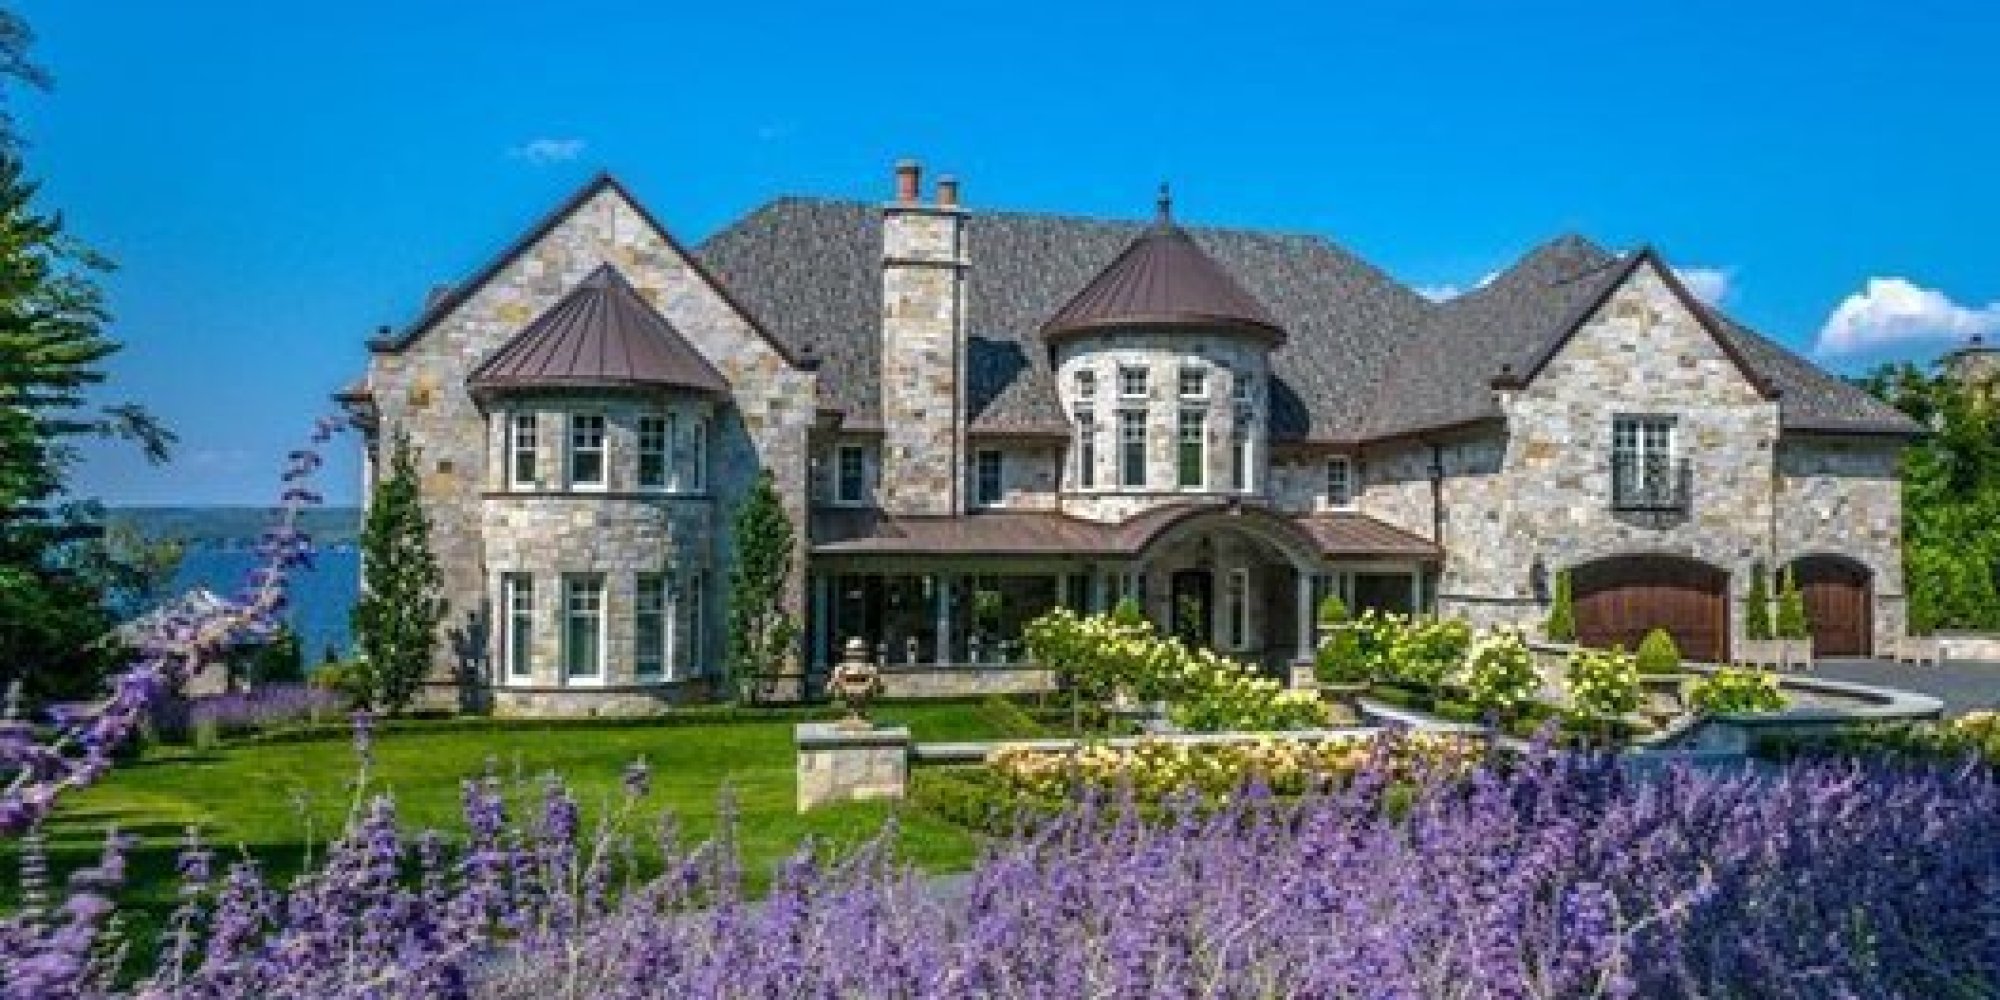 Quebec's Most Expensive House Ever Sold Through MLS Fetches $13.25 Million